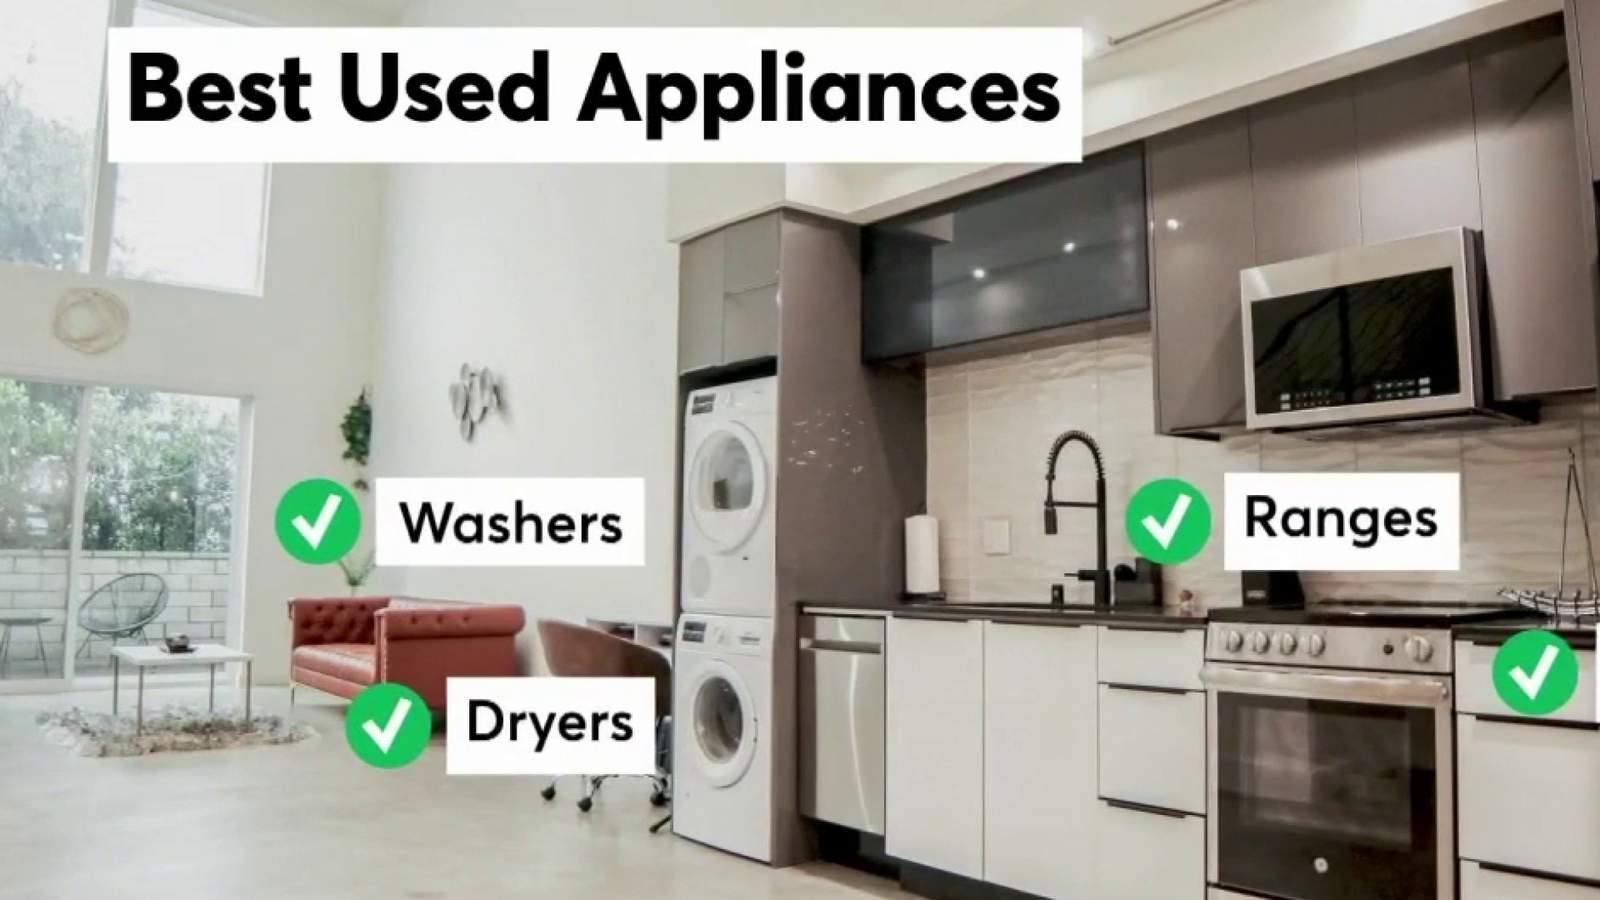 Should you buy used appliances?